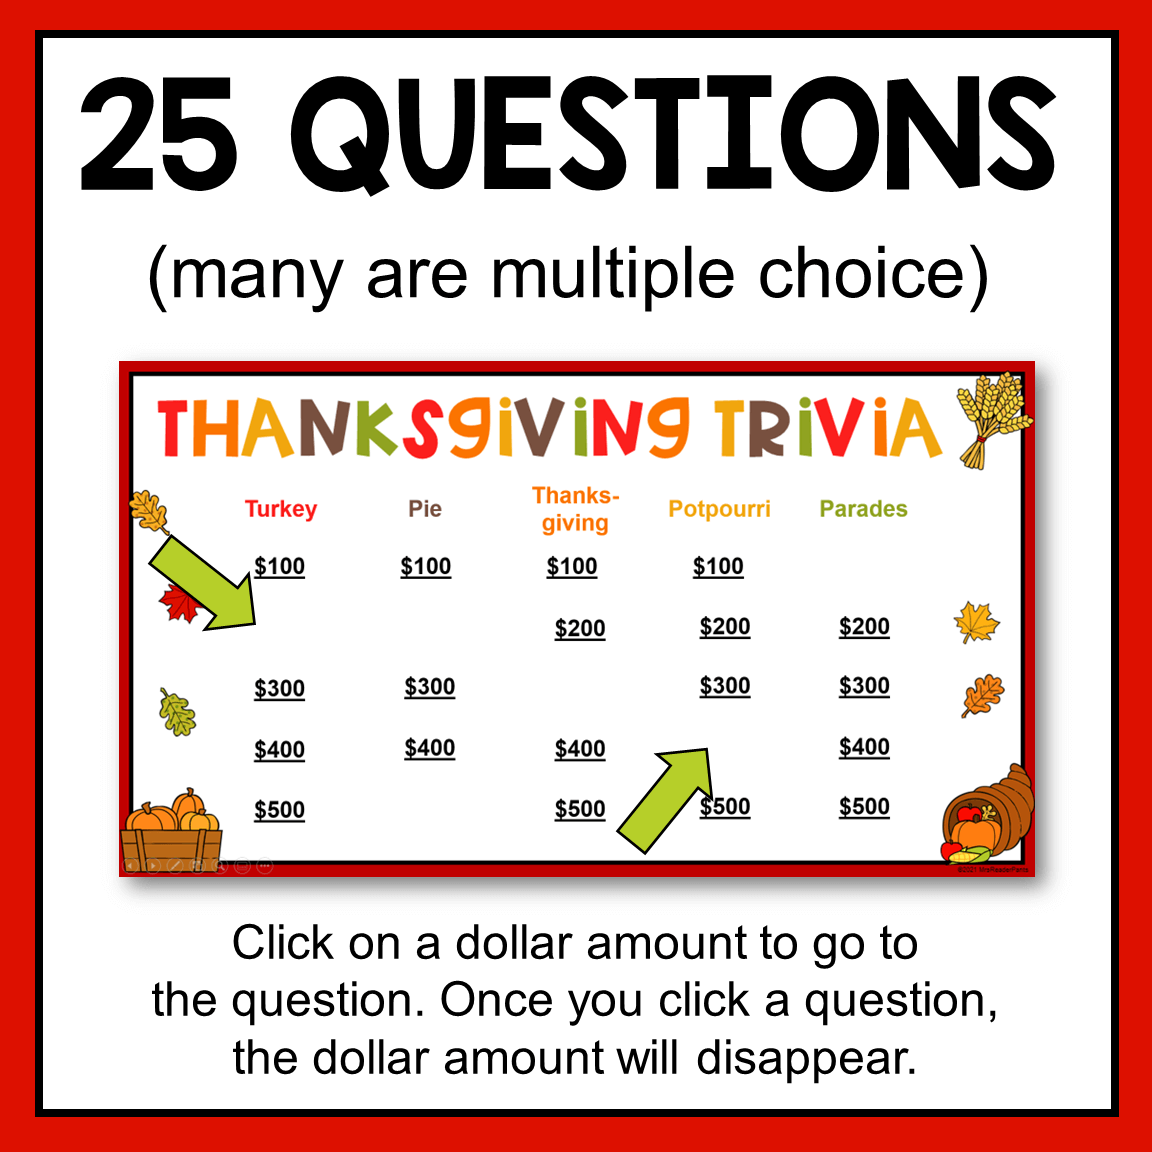 This Thanksgiving Trivia Game has 25 question and answer slides.